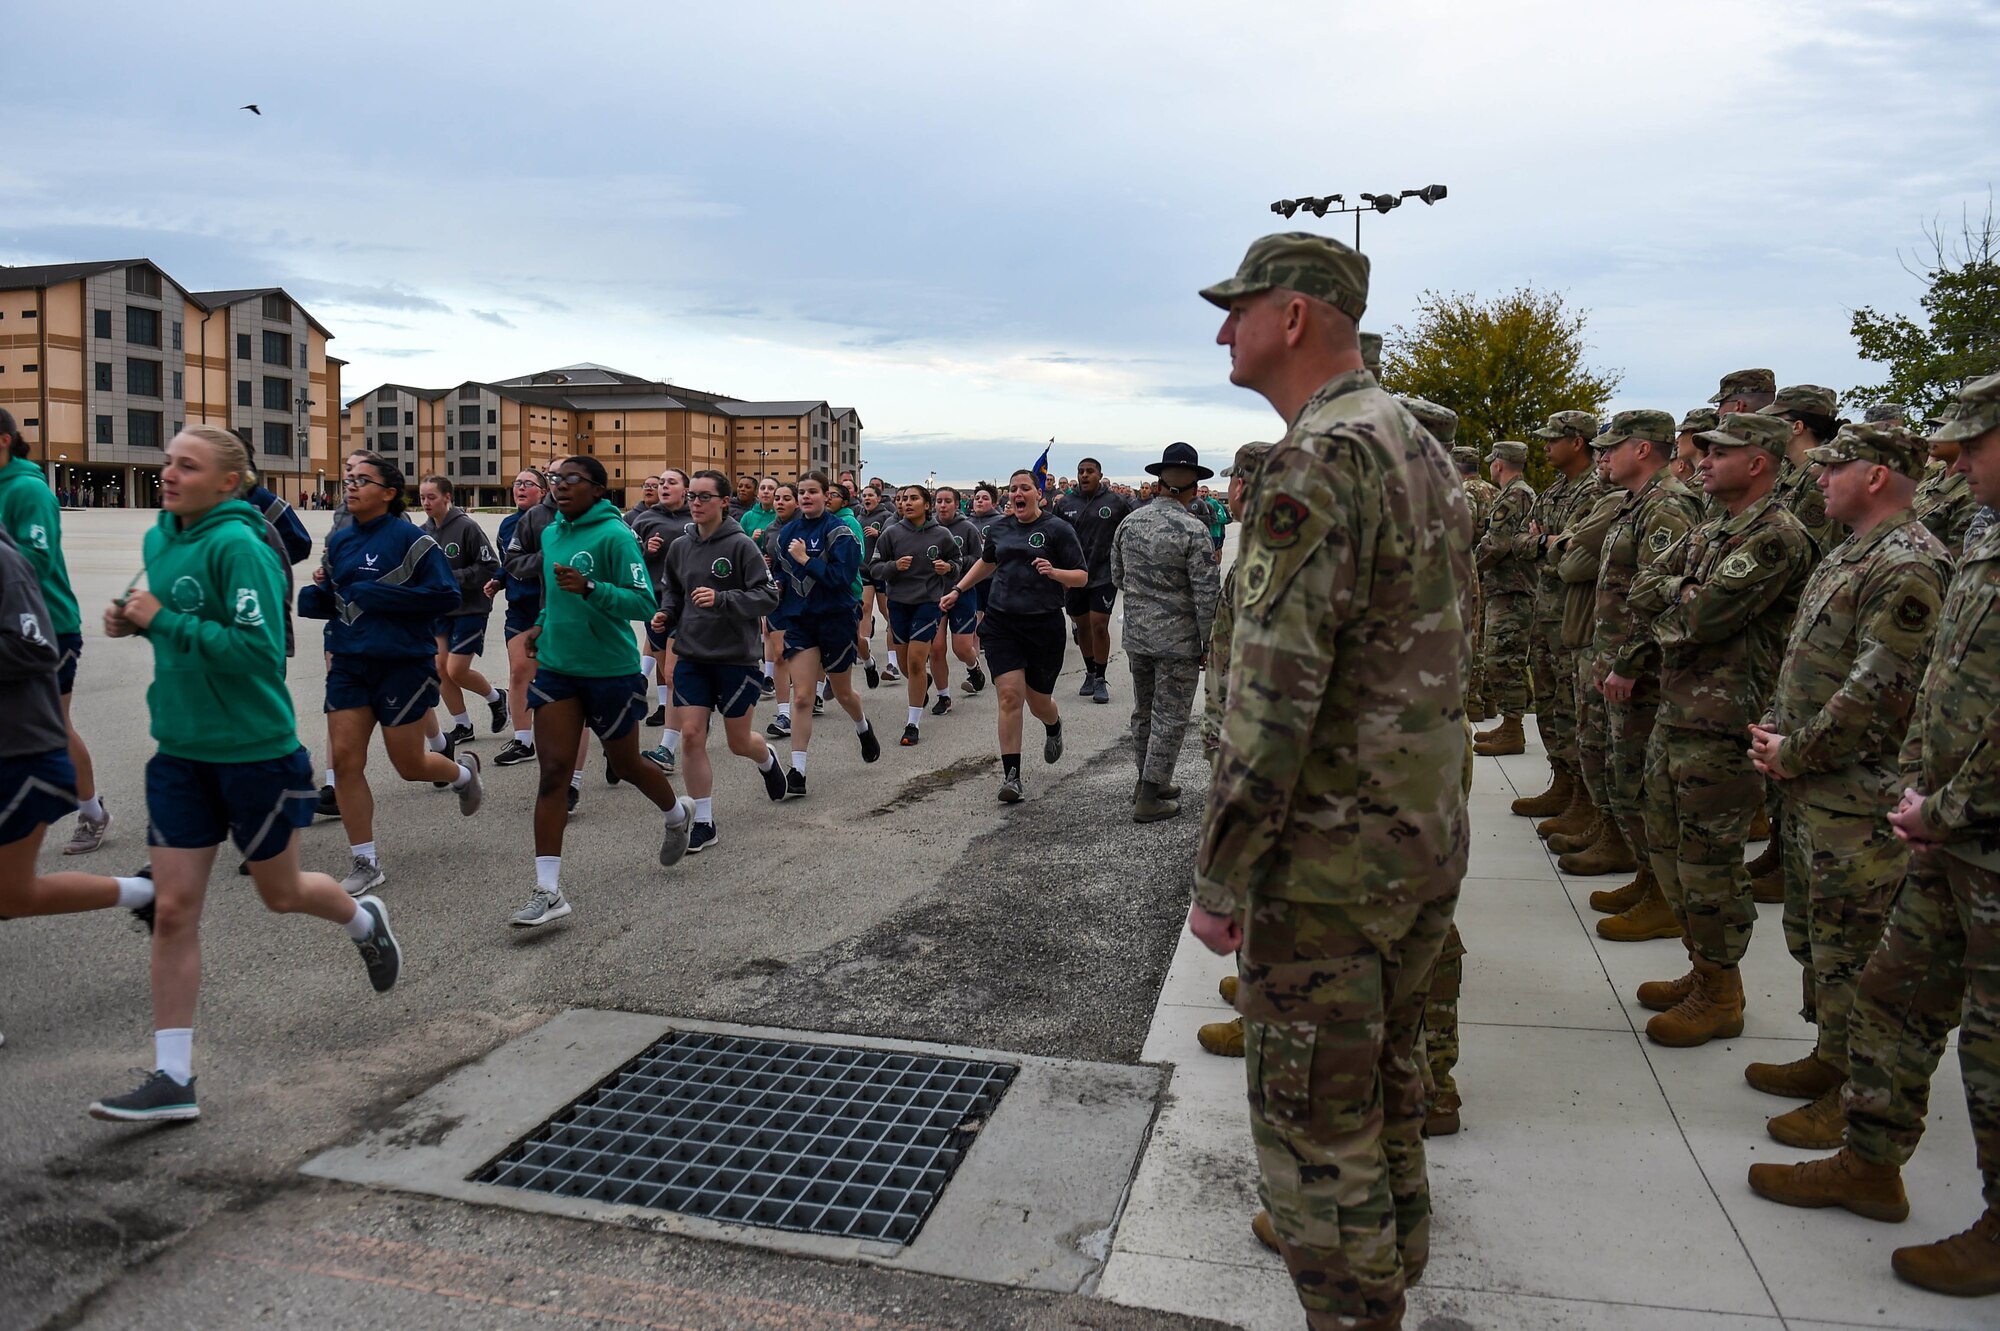 U.S. Air Force Basic Military trainees participate in the Airmen’s Run while Chief Master Sgt. John Lipsey, center right, 62nd Maintenance Group command chief, and other leadership members from the 62nd Airlift Wing, Joint Base Lewis-McChord, Wash., watch the run Oct. 17, 2019. The Airmen’s Run is one of the graduation events that all Basic Military Training flights participate in. It occurs on the main drill pad where families and friends of graduating trainees can cheer and spectate.